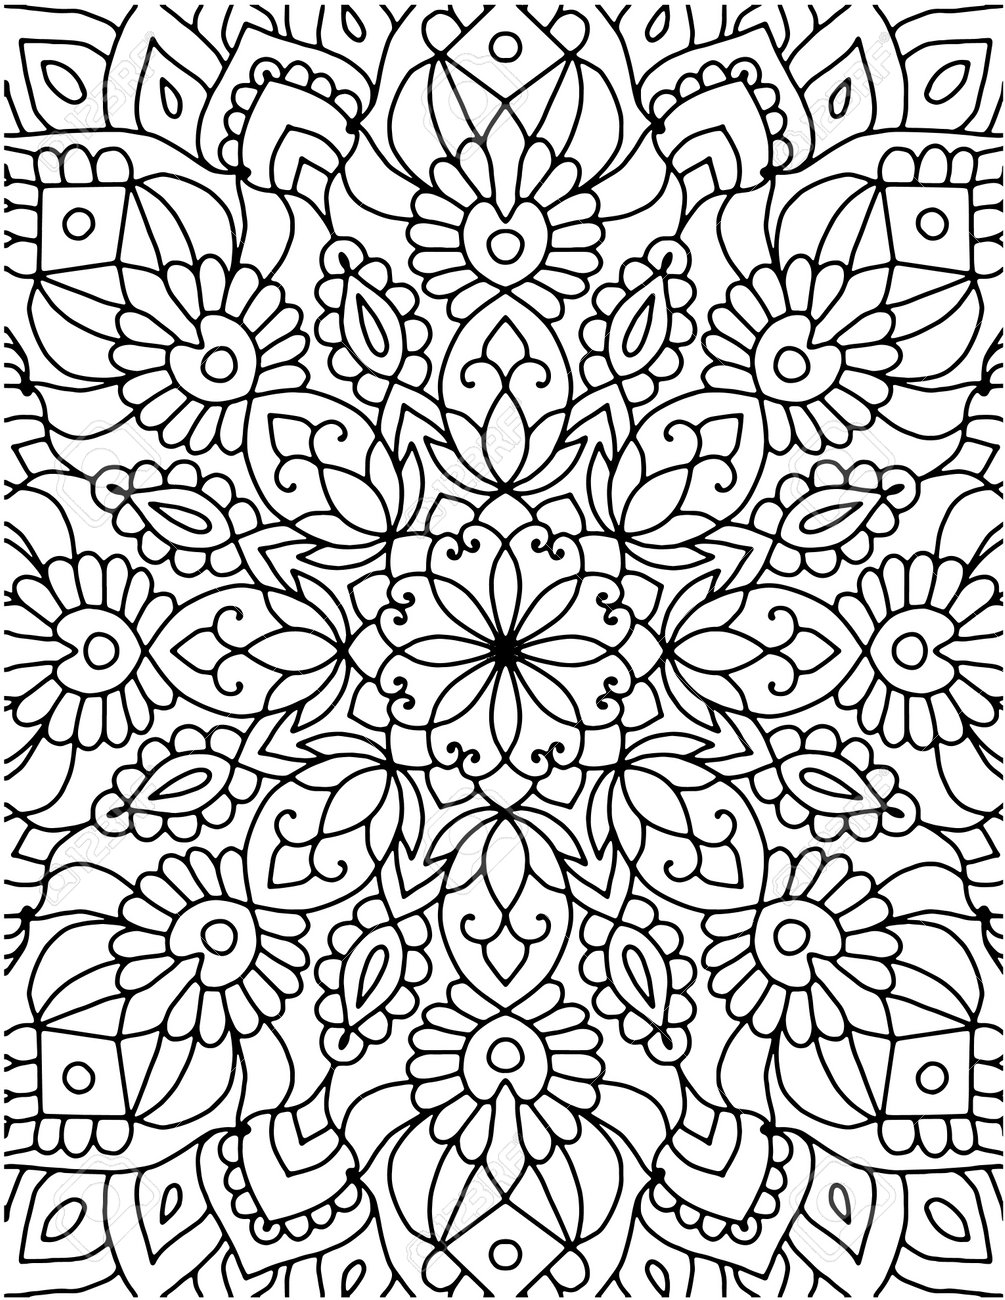 Hand drawn mandala coloring pages for adult coloring book floral hand drawn mandala coloring page unique and amazing hand drawn mandala art with digital devices stock photo picture and royalty free image